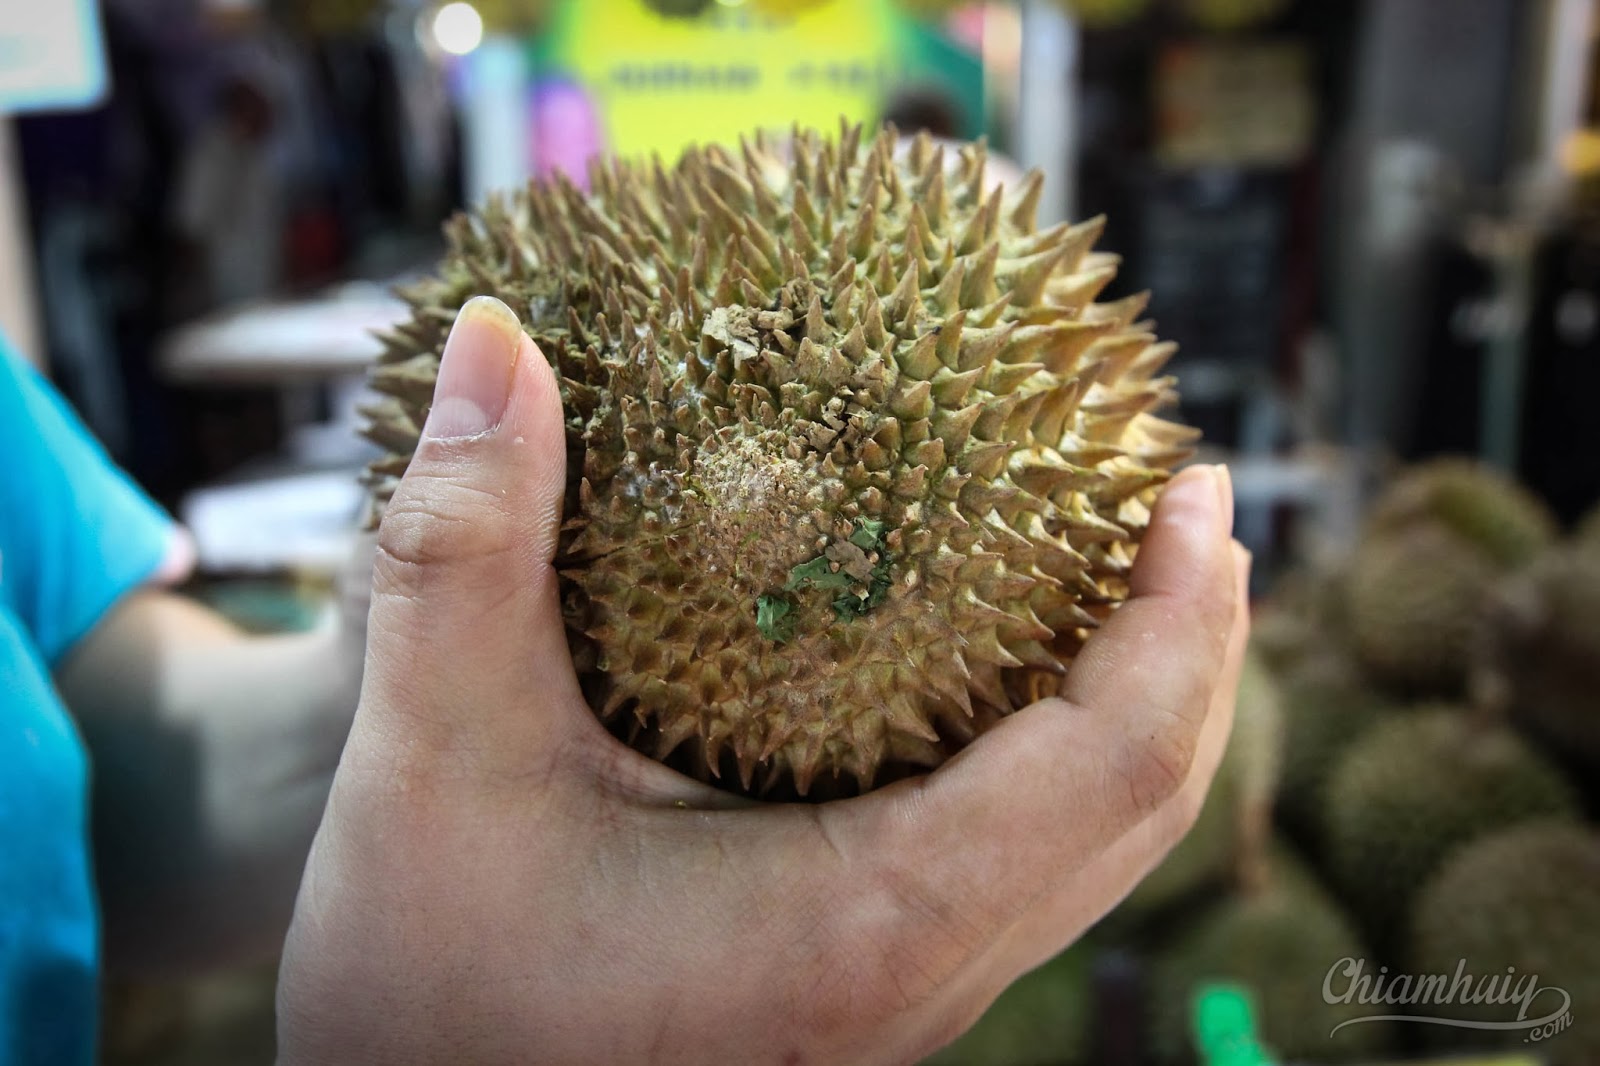 Best durian in Singapore - LeLe Durian Stall - Celine Chiam | Singapore